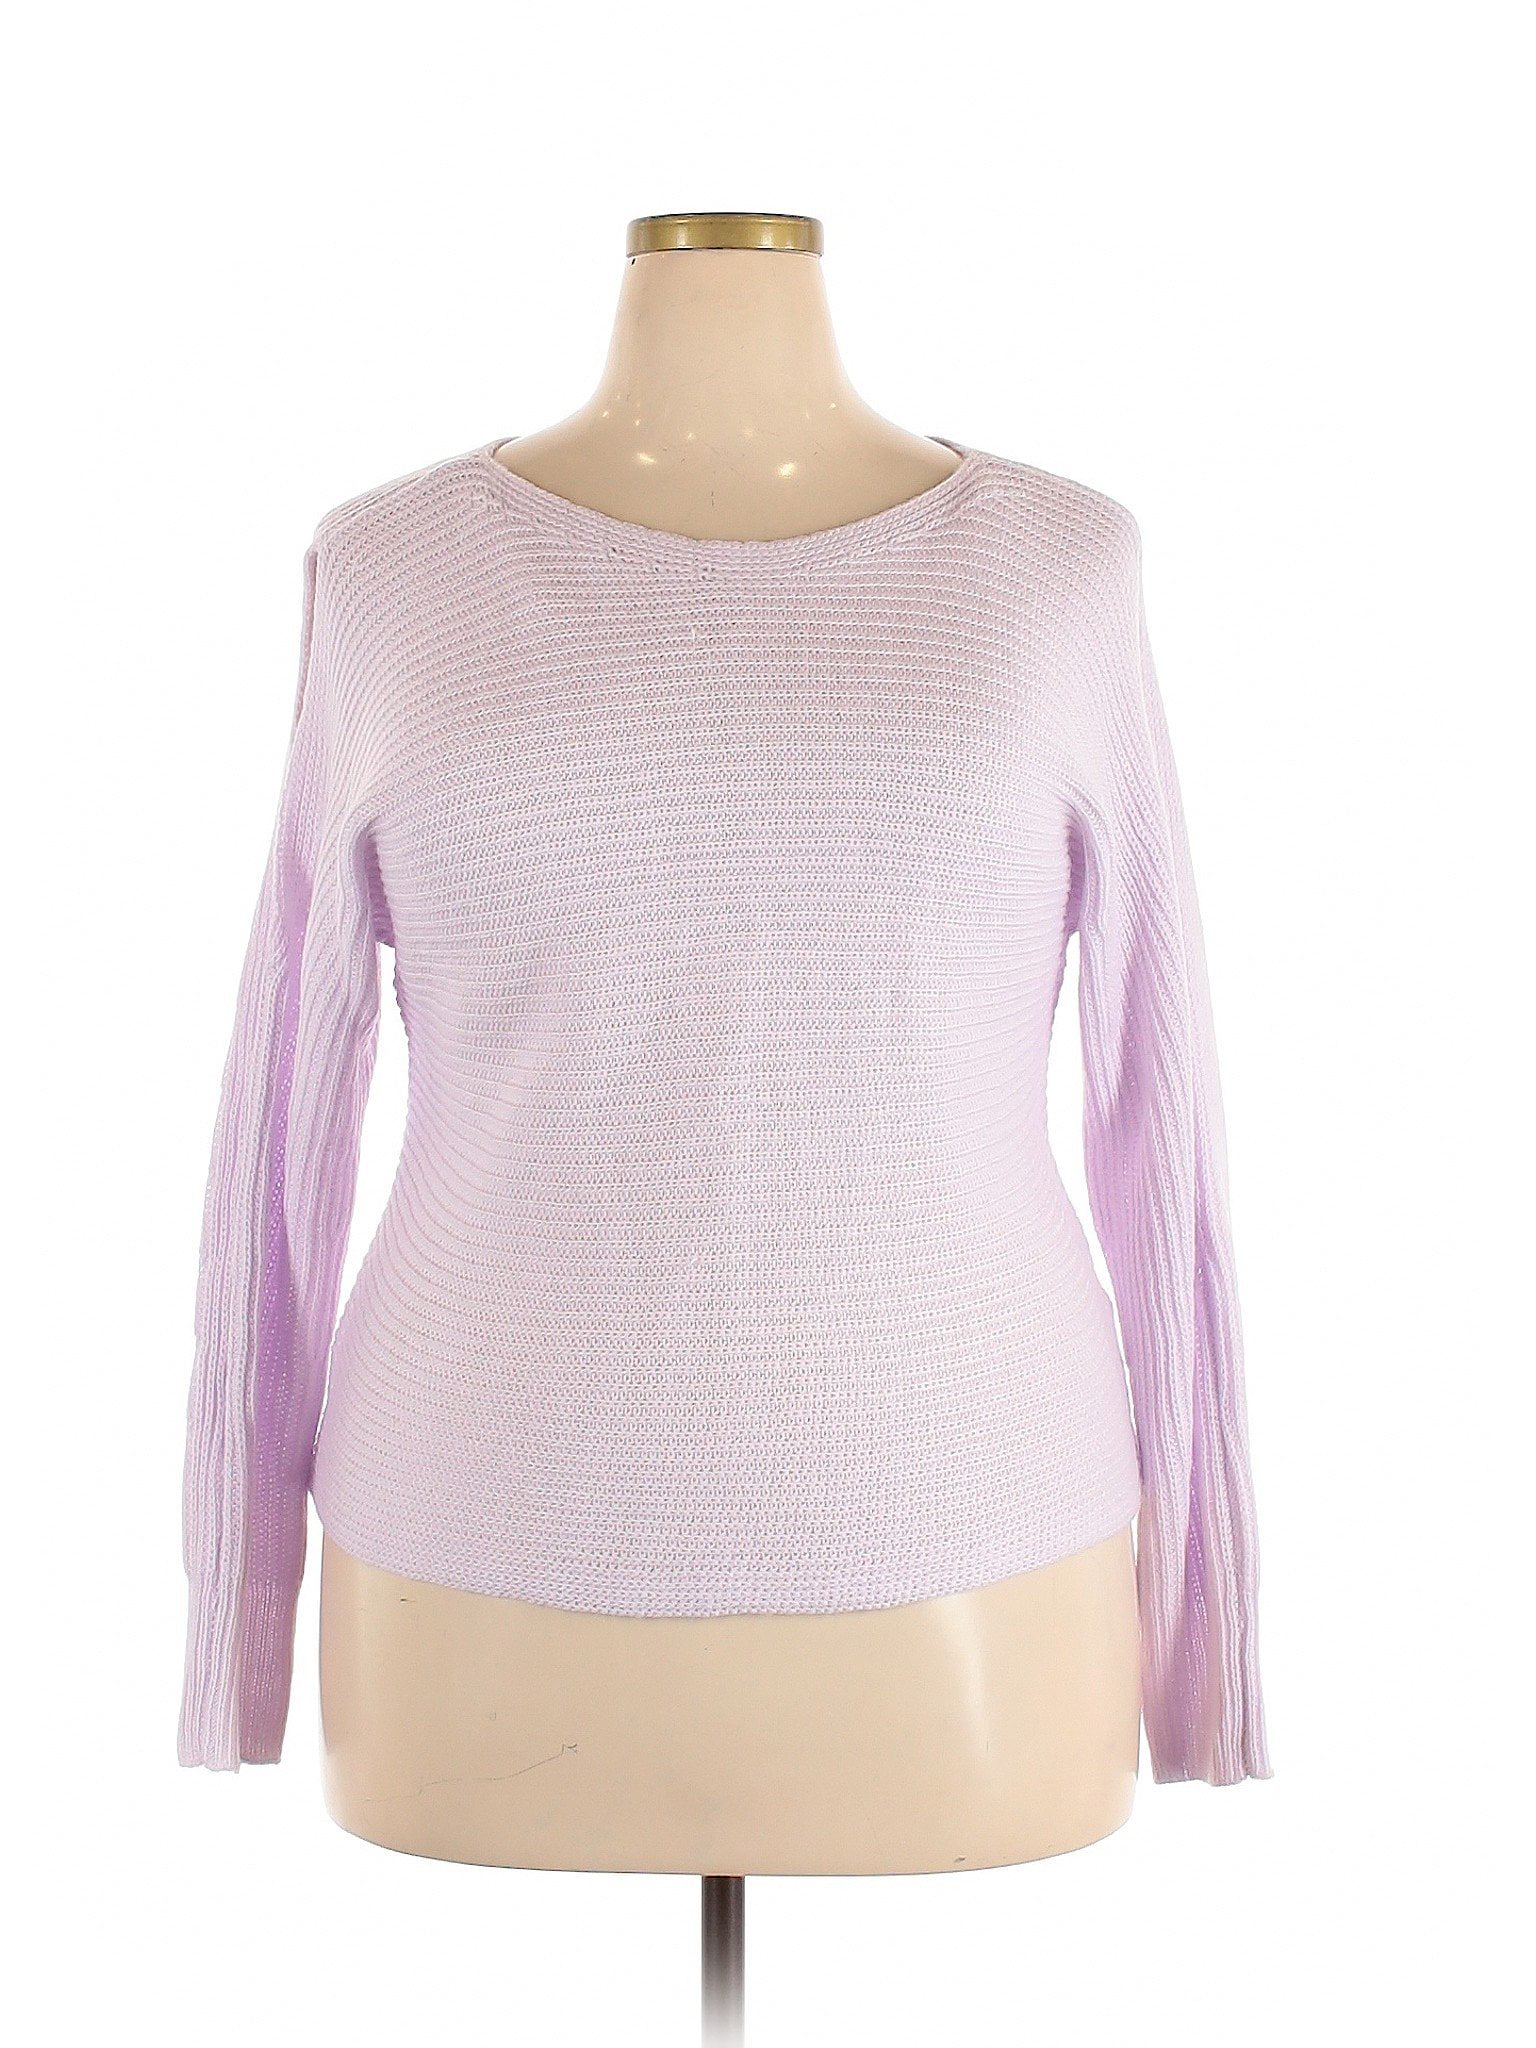 Pin & Clover - Pre-Owned Pink Clover Women's Size XXL Pullover Sweater ...